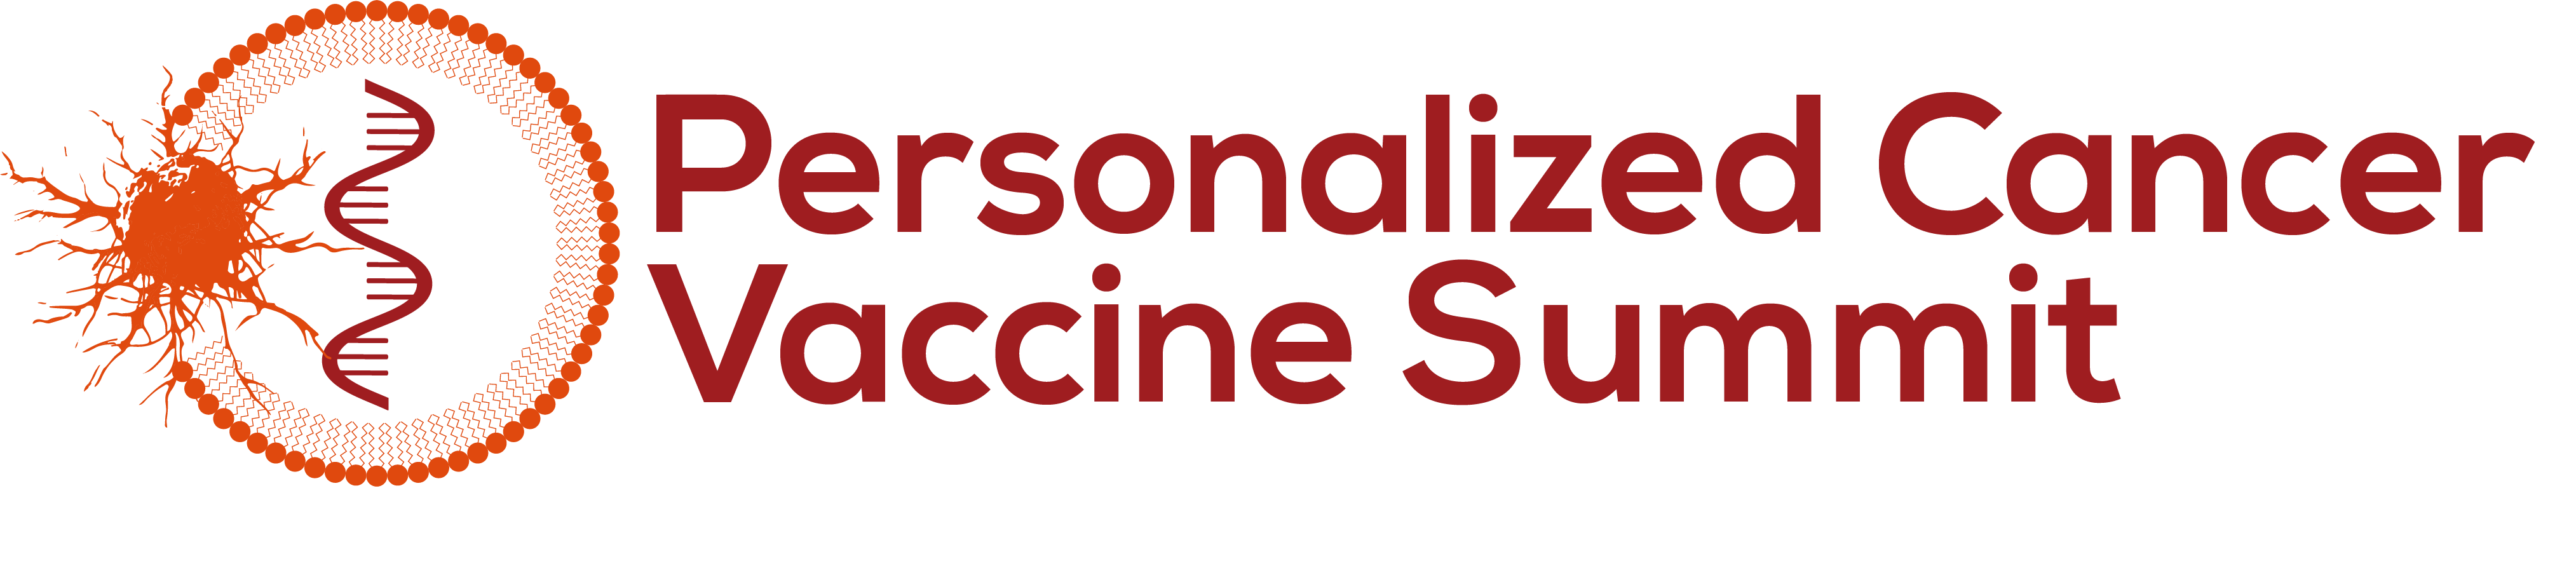 Personalized Cancer Vaccine Summit Logo